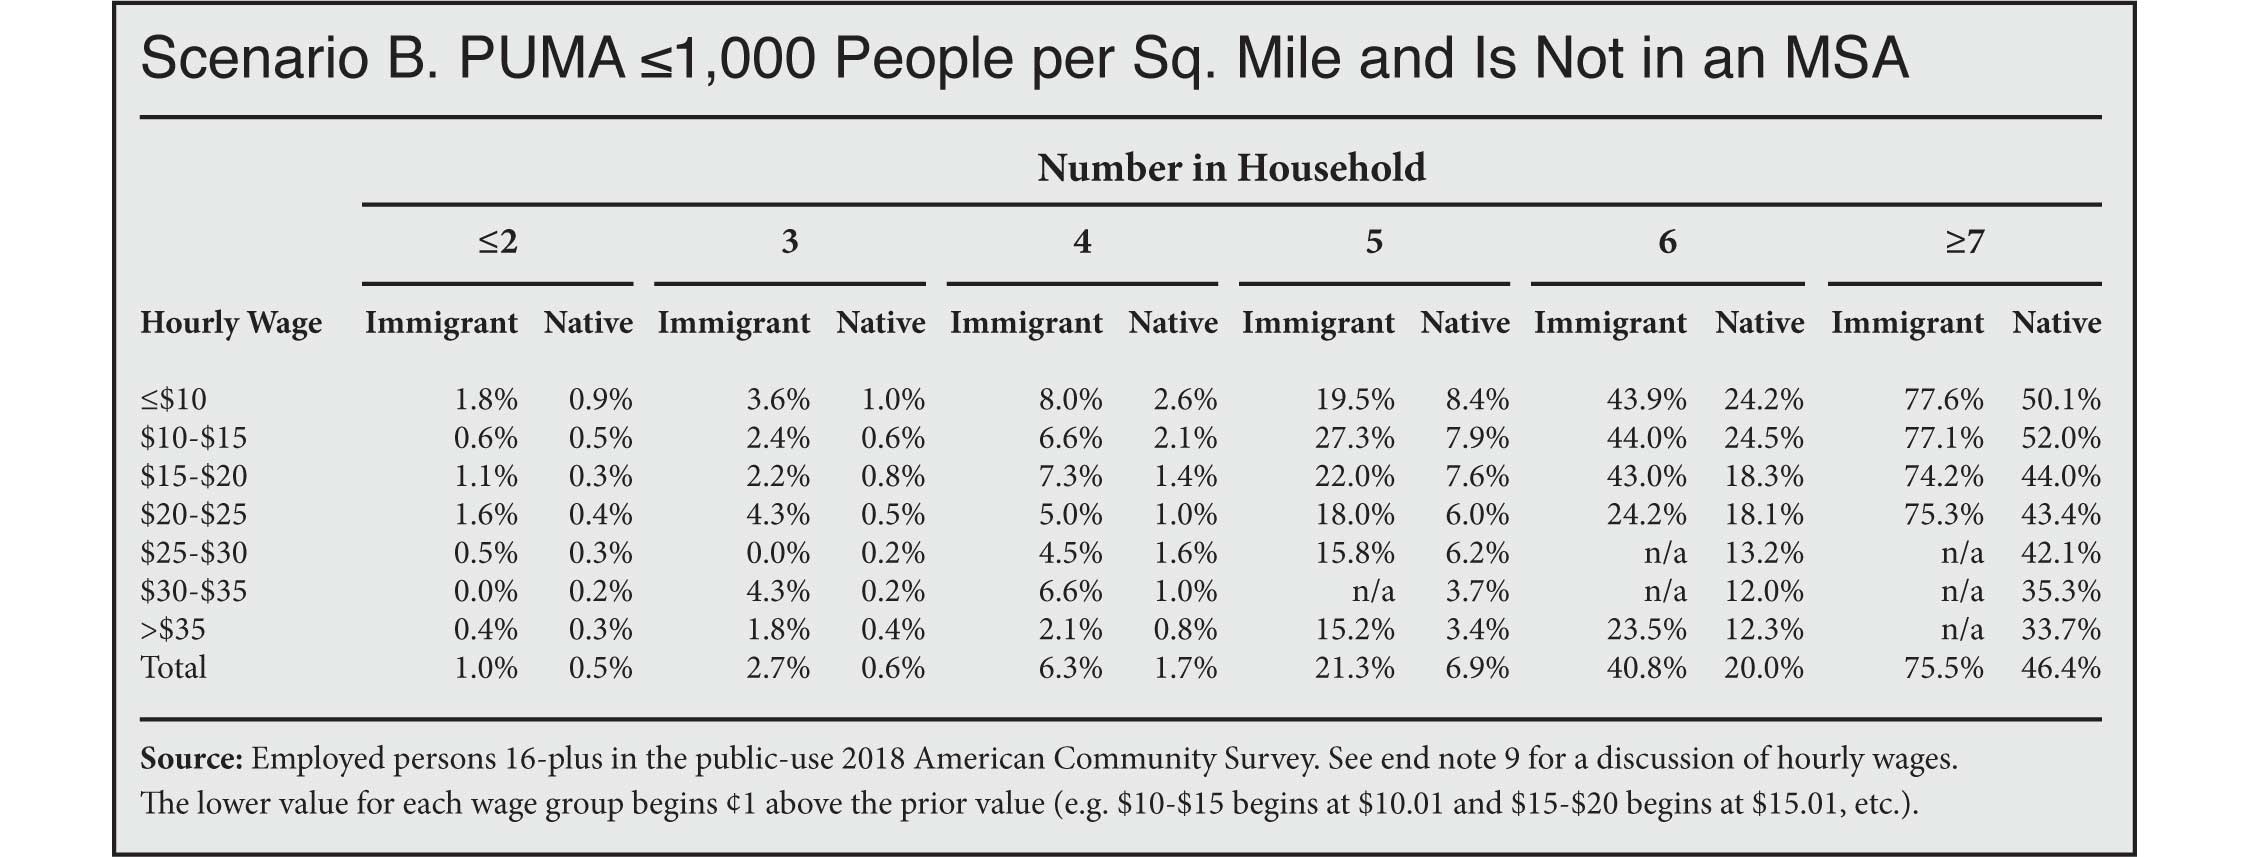 Overcrowding for Immigrant and Native-Born Workers by Wage, Household Size and Population Density, PUMA <1000 people per square mile and is not MSA